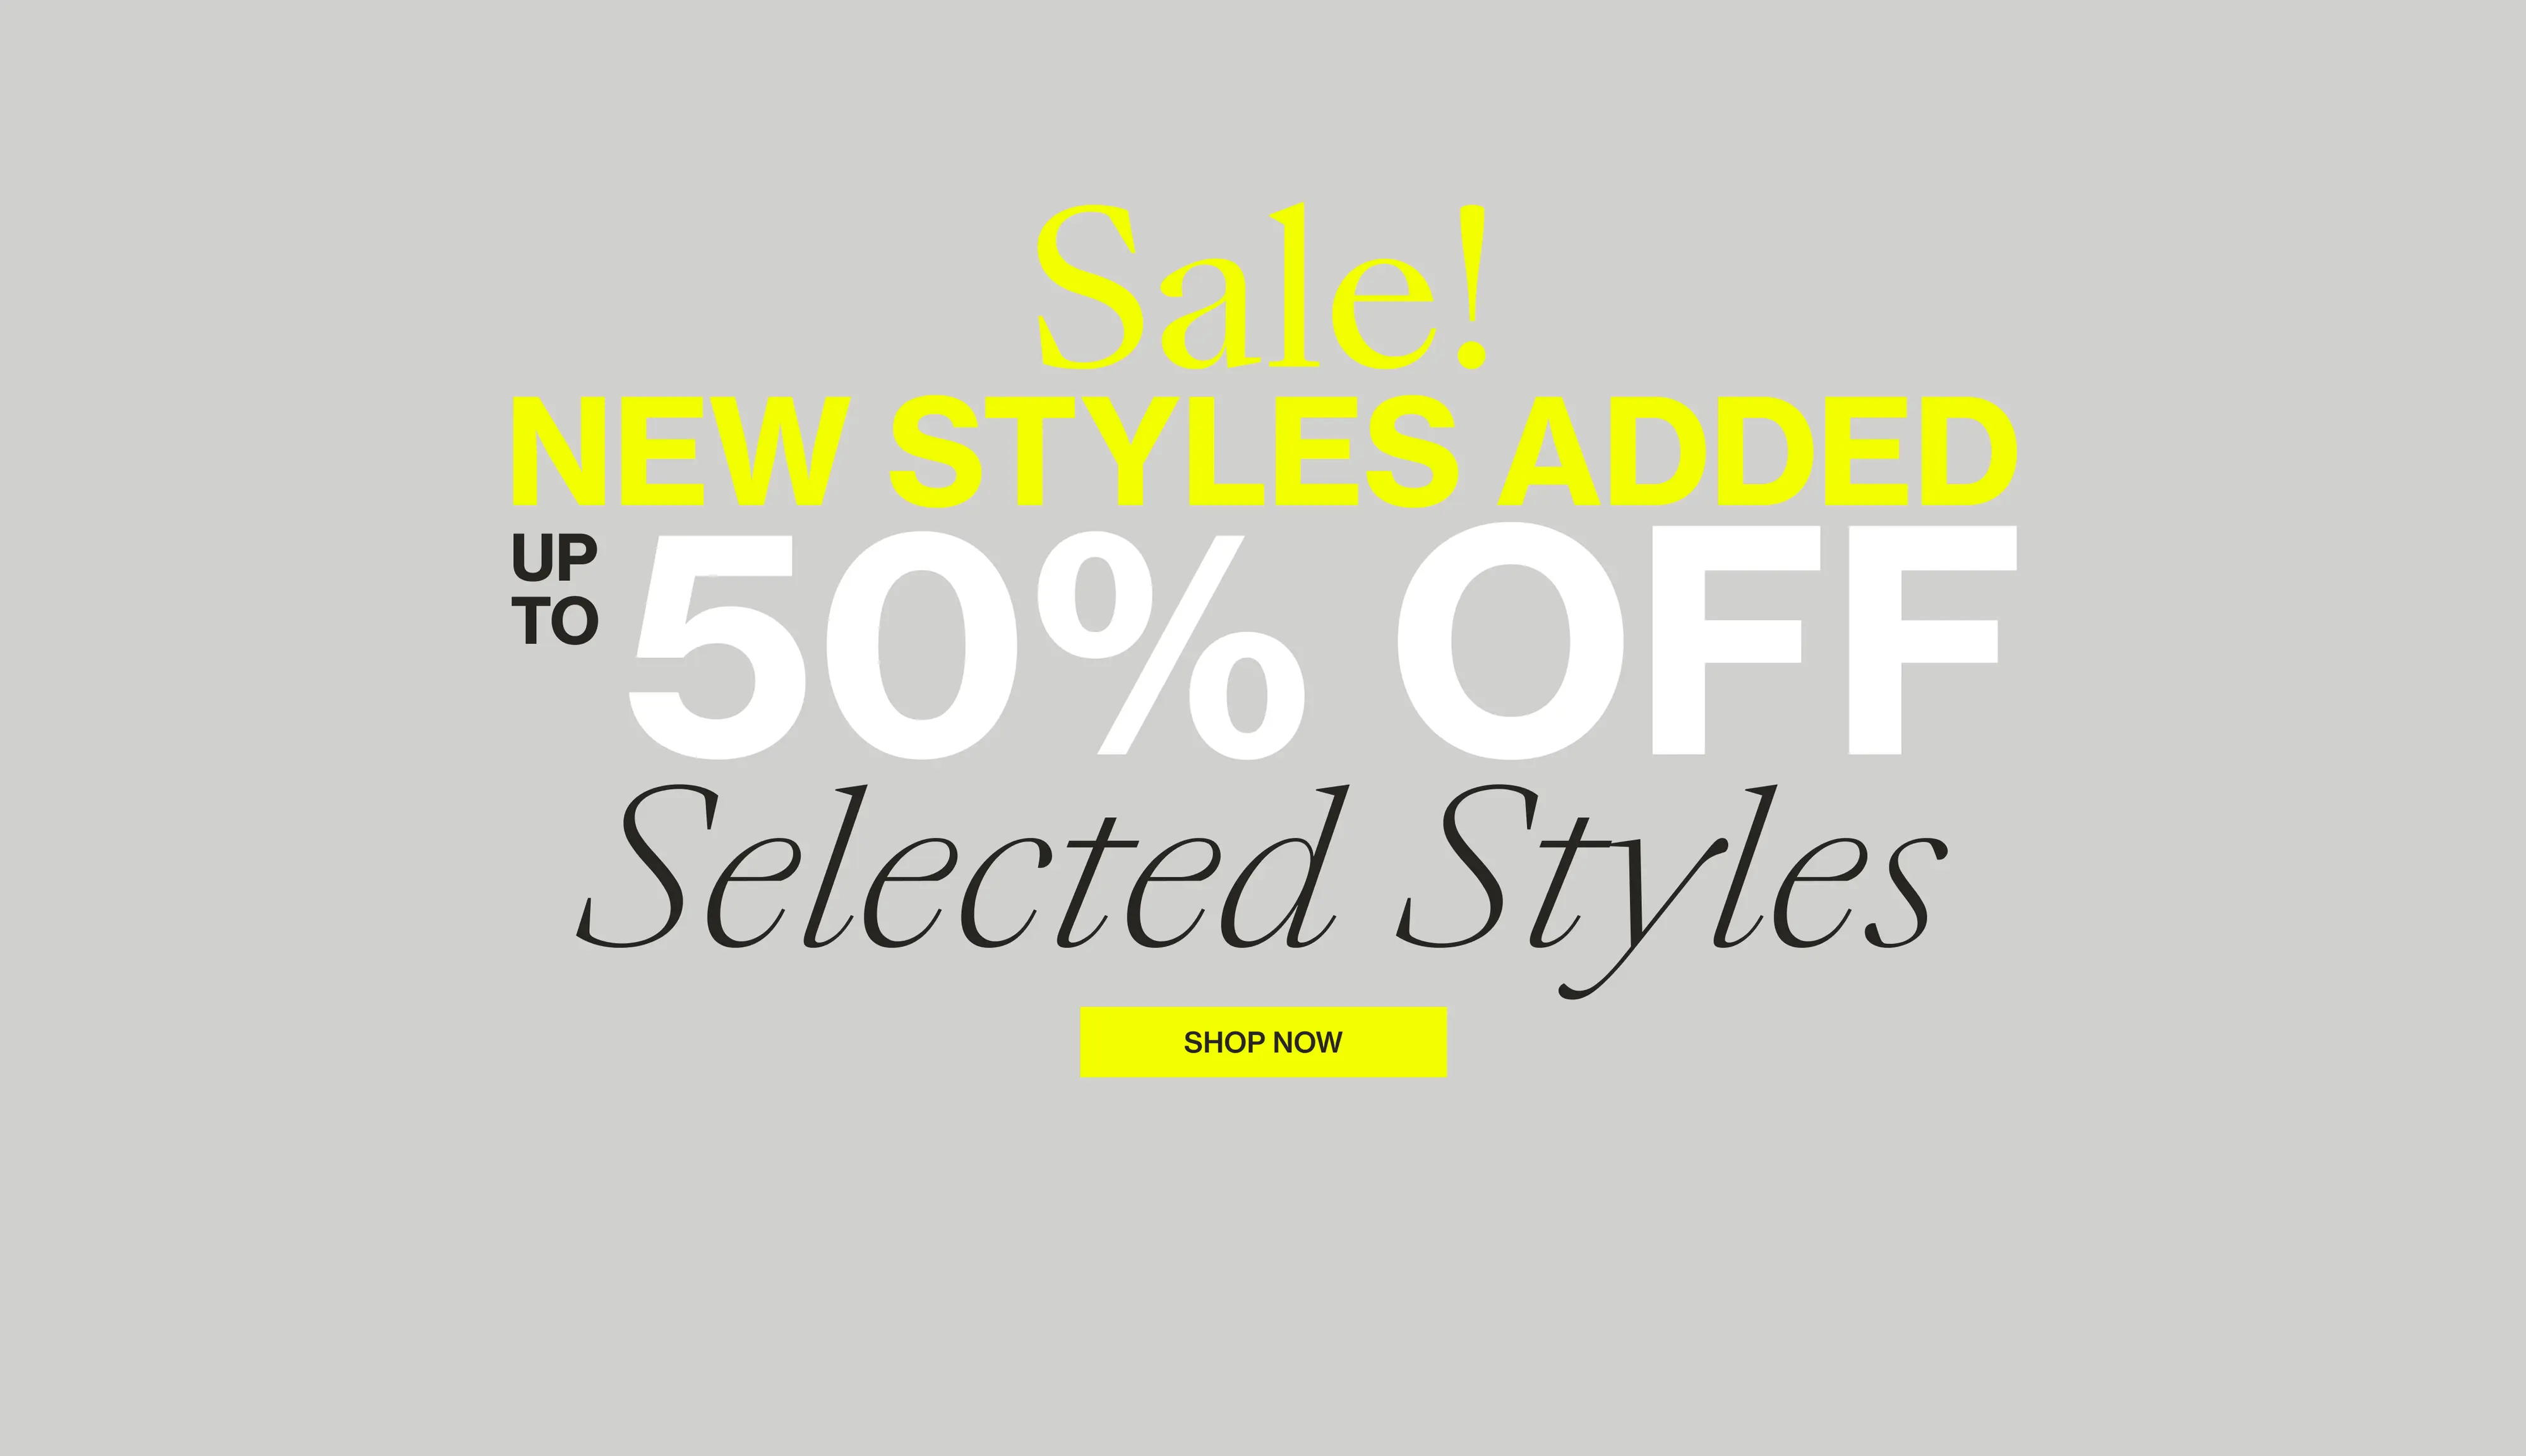 Up to 50% OFF selected styles at Commonry